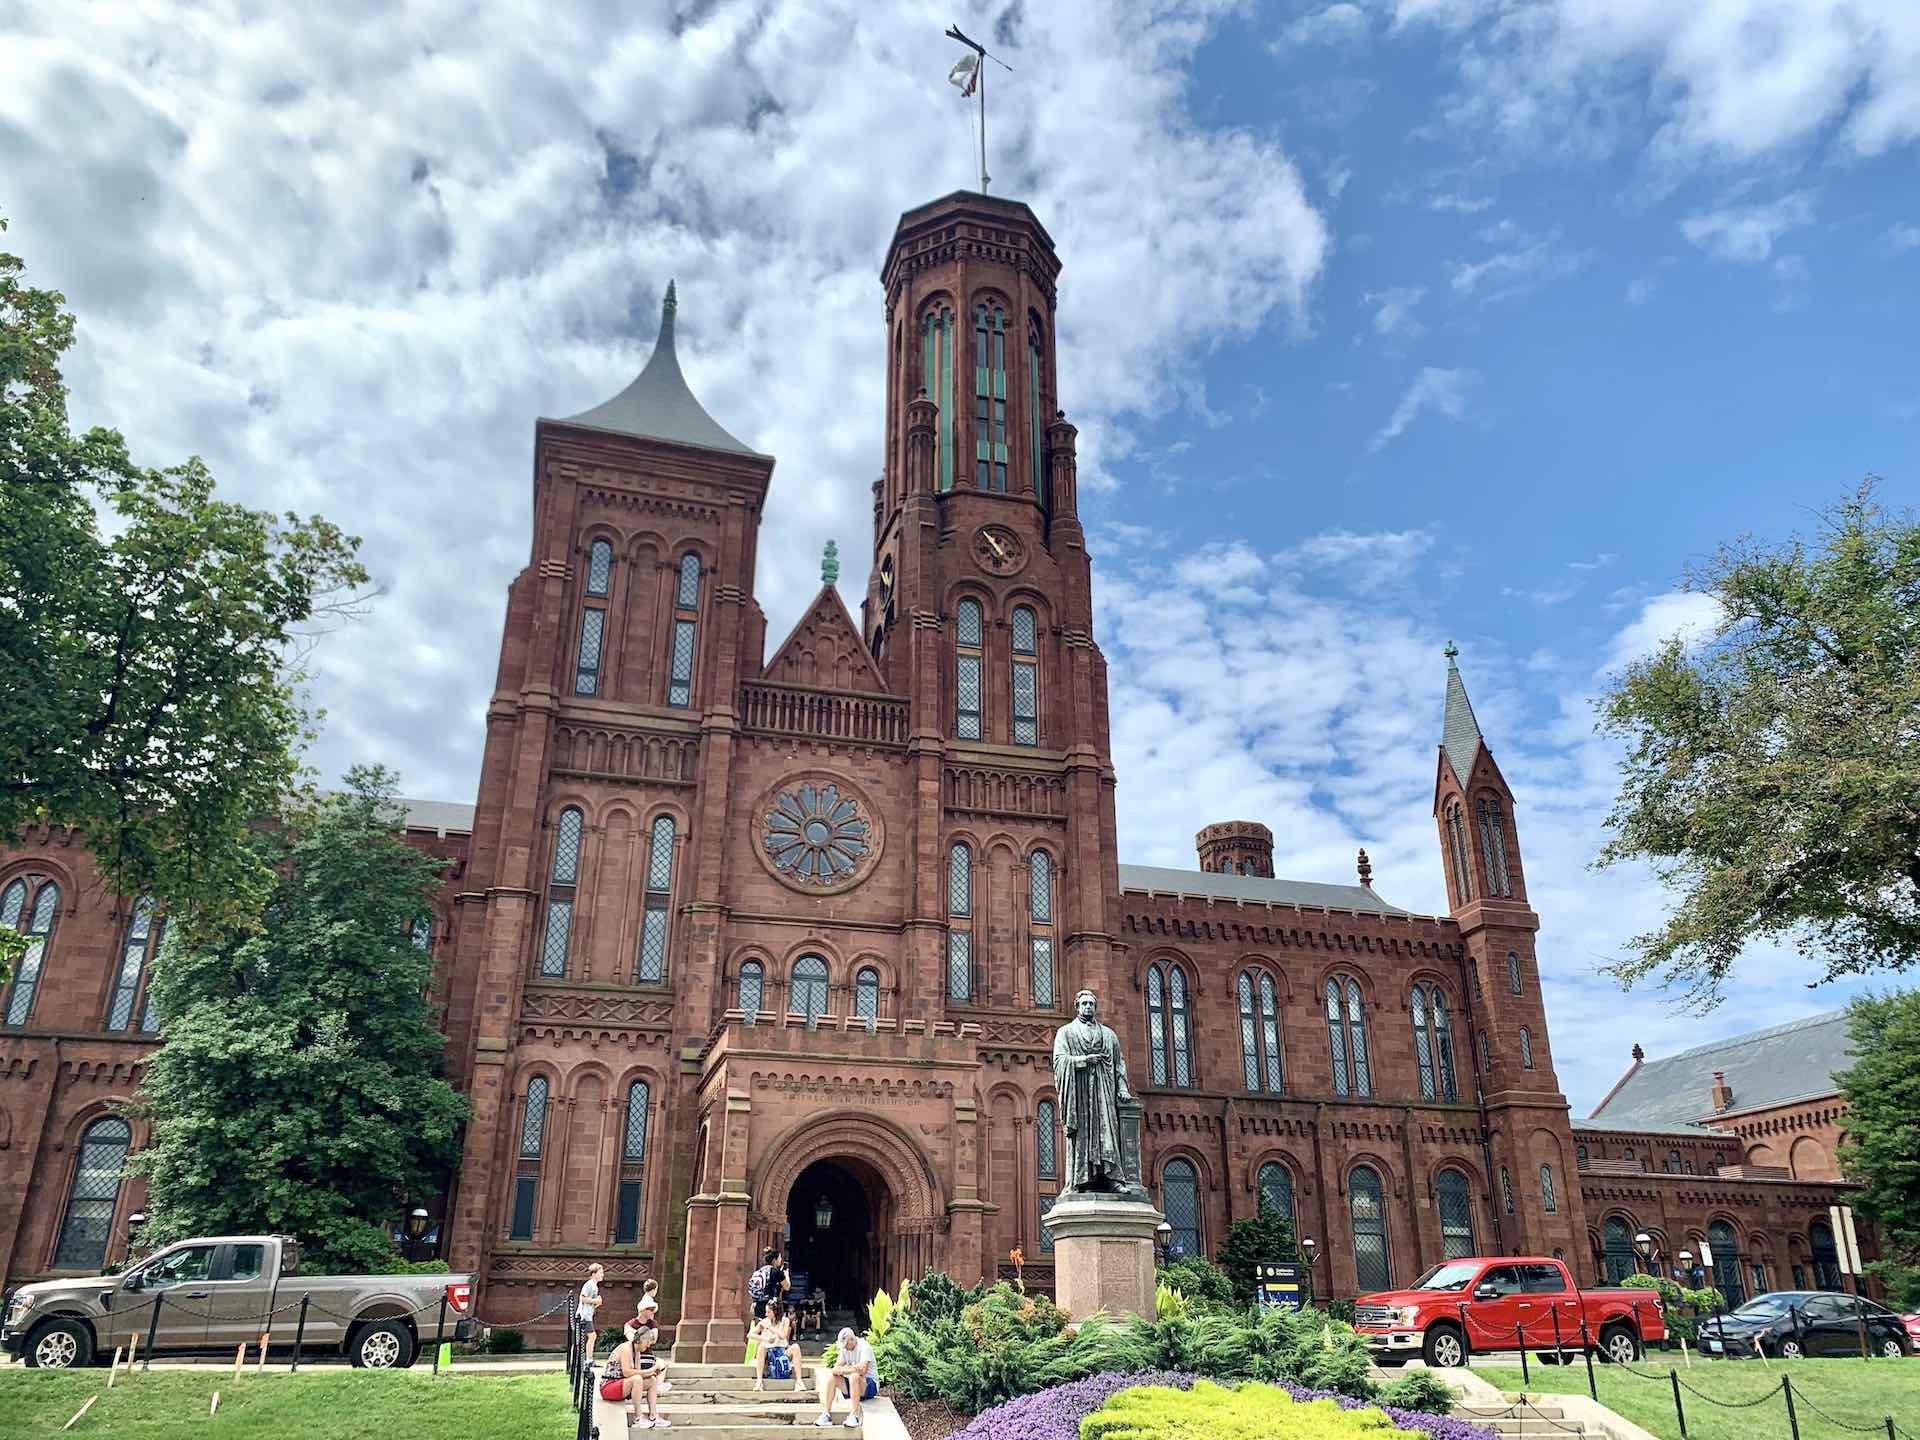 Love the Smithsonian's architecture.